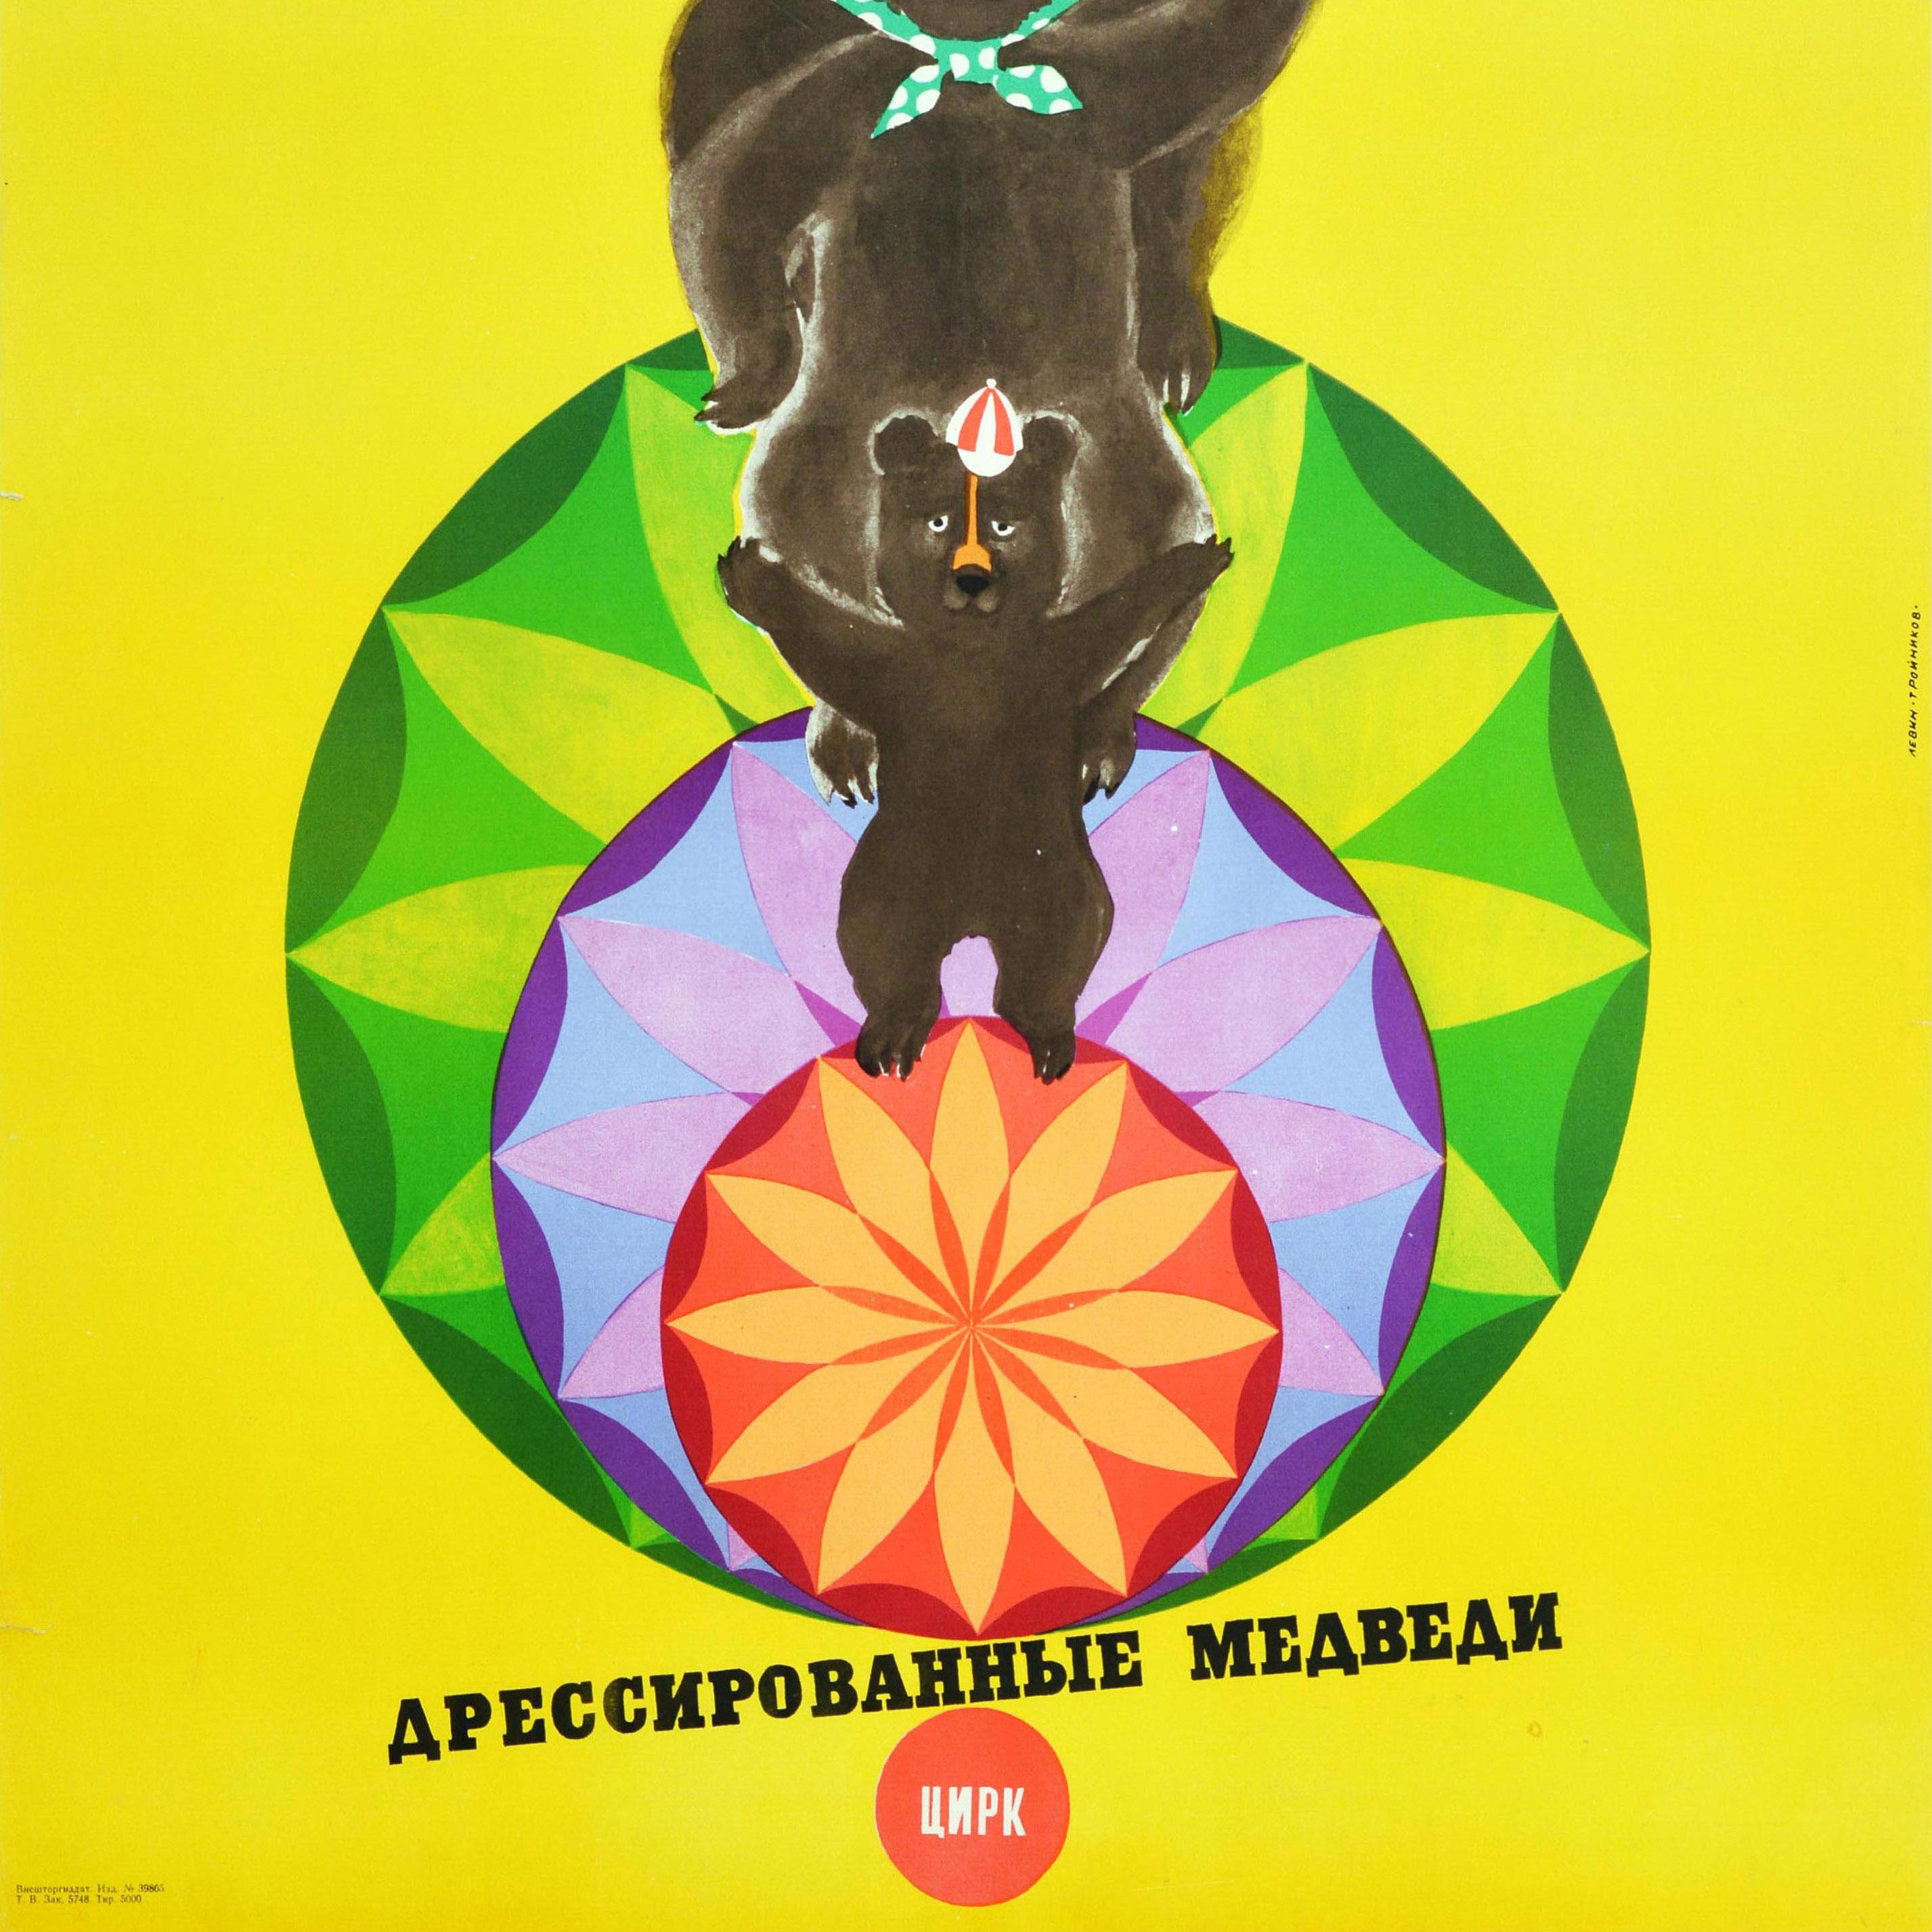 Original vintage Soviet circus poster - Дрессированные Медведи Цирк / Trained Bears - featuring three bears as a family on top of three colourful balls against a bright background, the small bear at the front wearing a cap with the mother bear